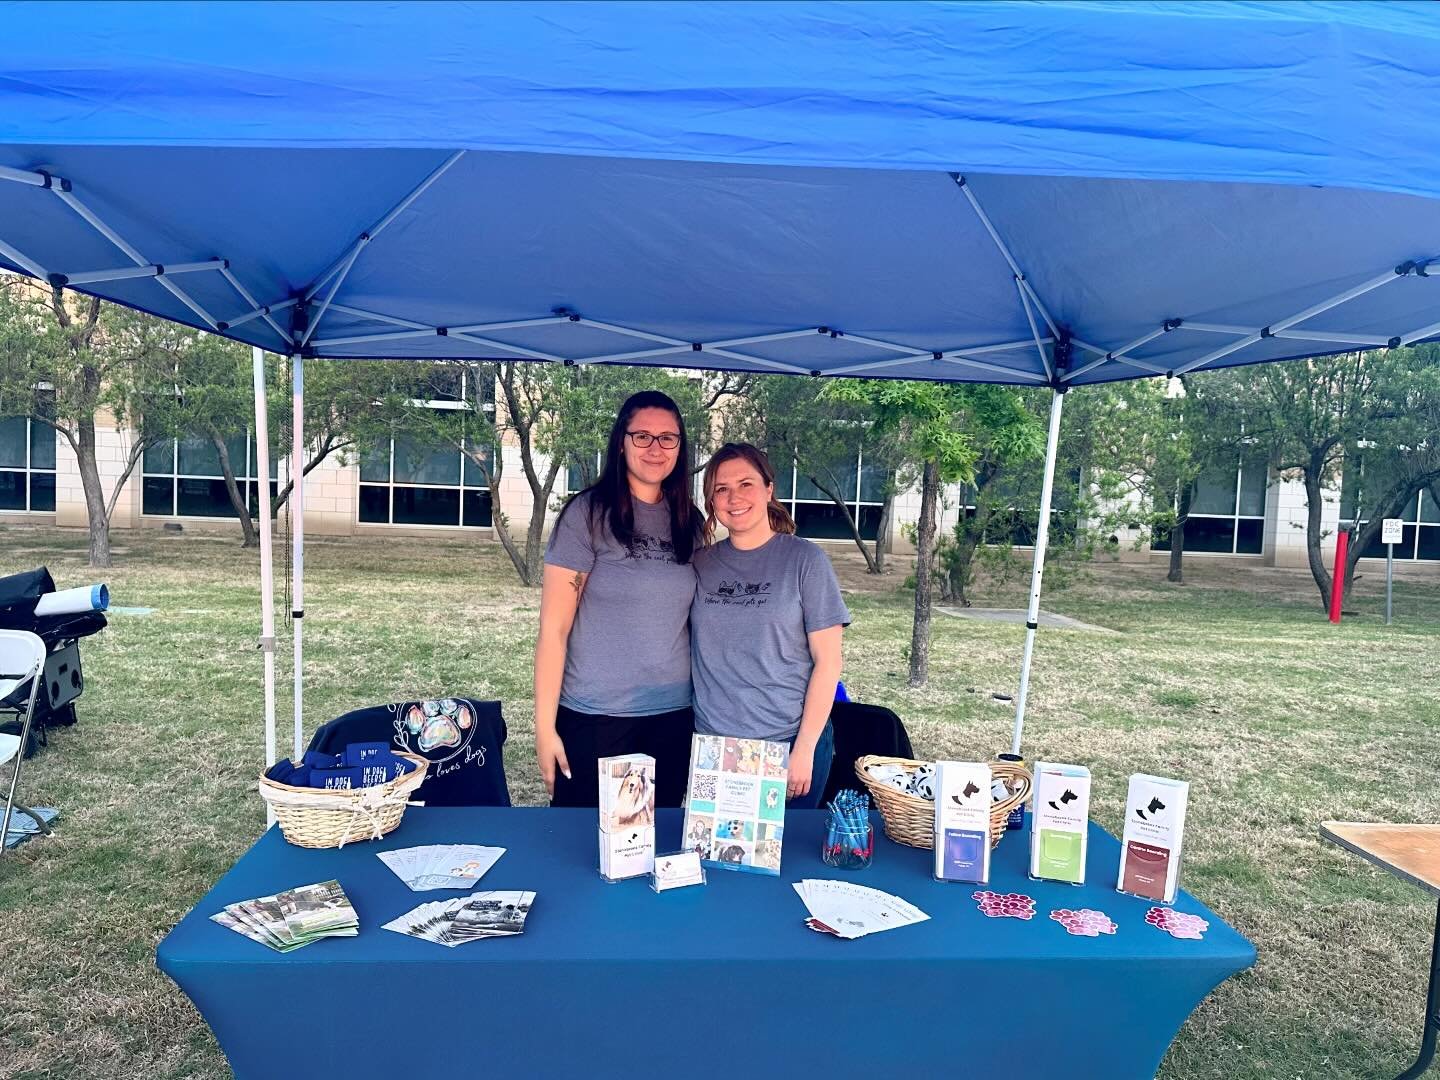 Go see Morgan &amp; Julia at @collincollege today while supporting the @txbigstarrace runners! Lots of giveaways 🥰🏃🏼&zwj;♀️🏃&zwj;♂️😎